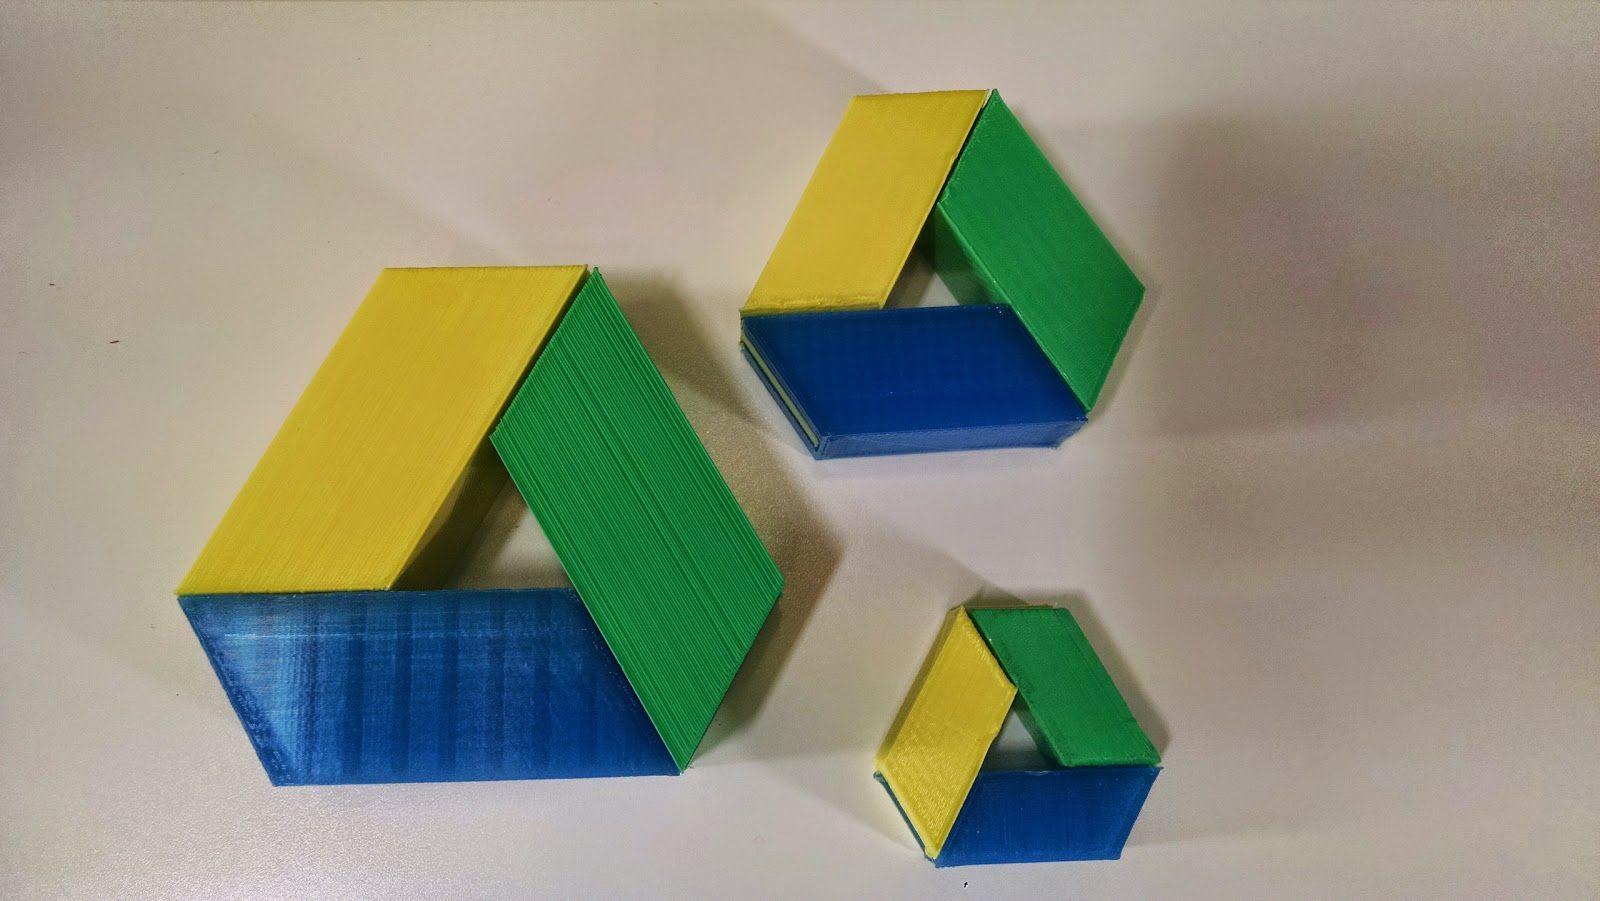 Green with Yellow Triangle Logo - Maker Club: Multi Color 3D Printing Using Snap Together Parts